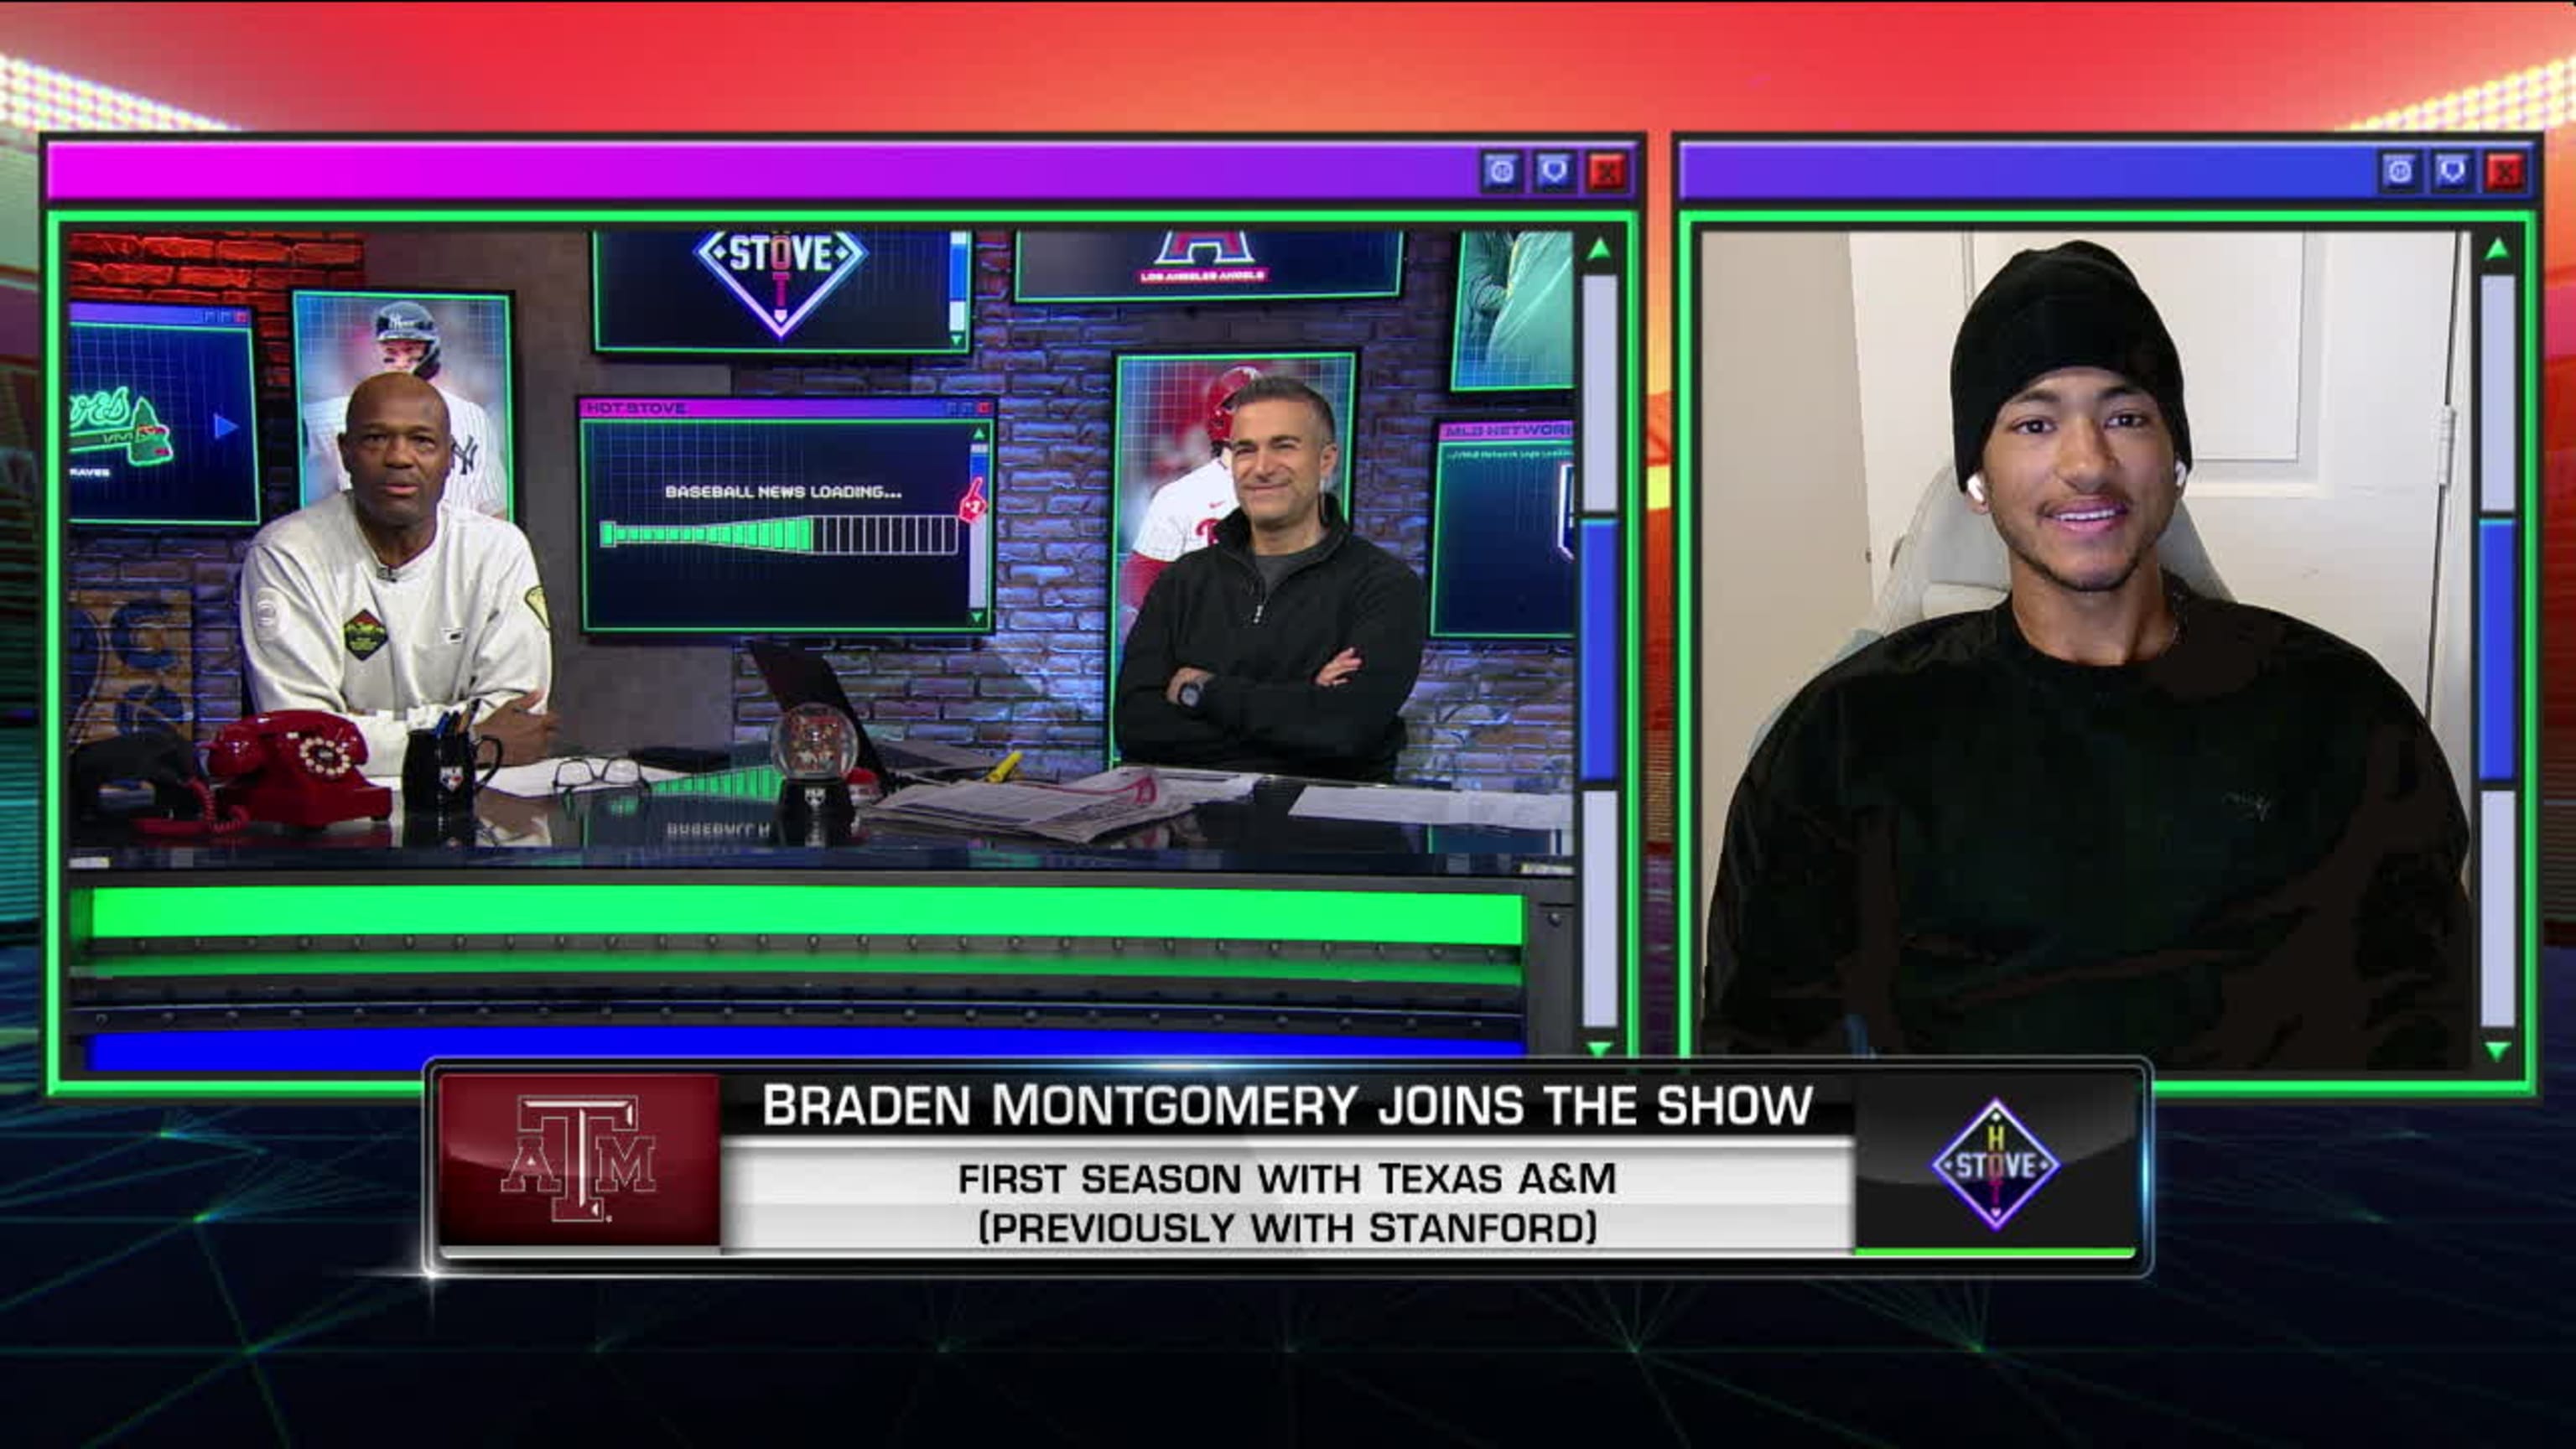 Braden Montgomery on success with Texas A&M